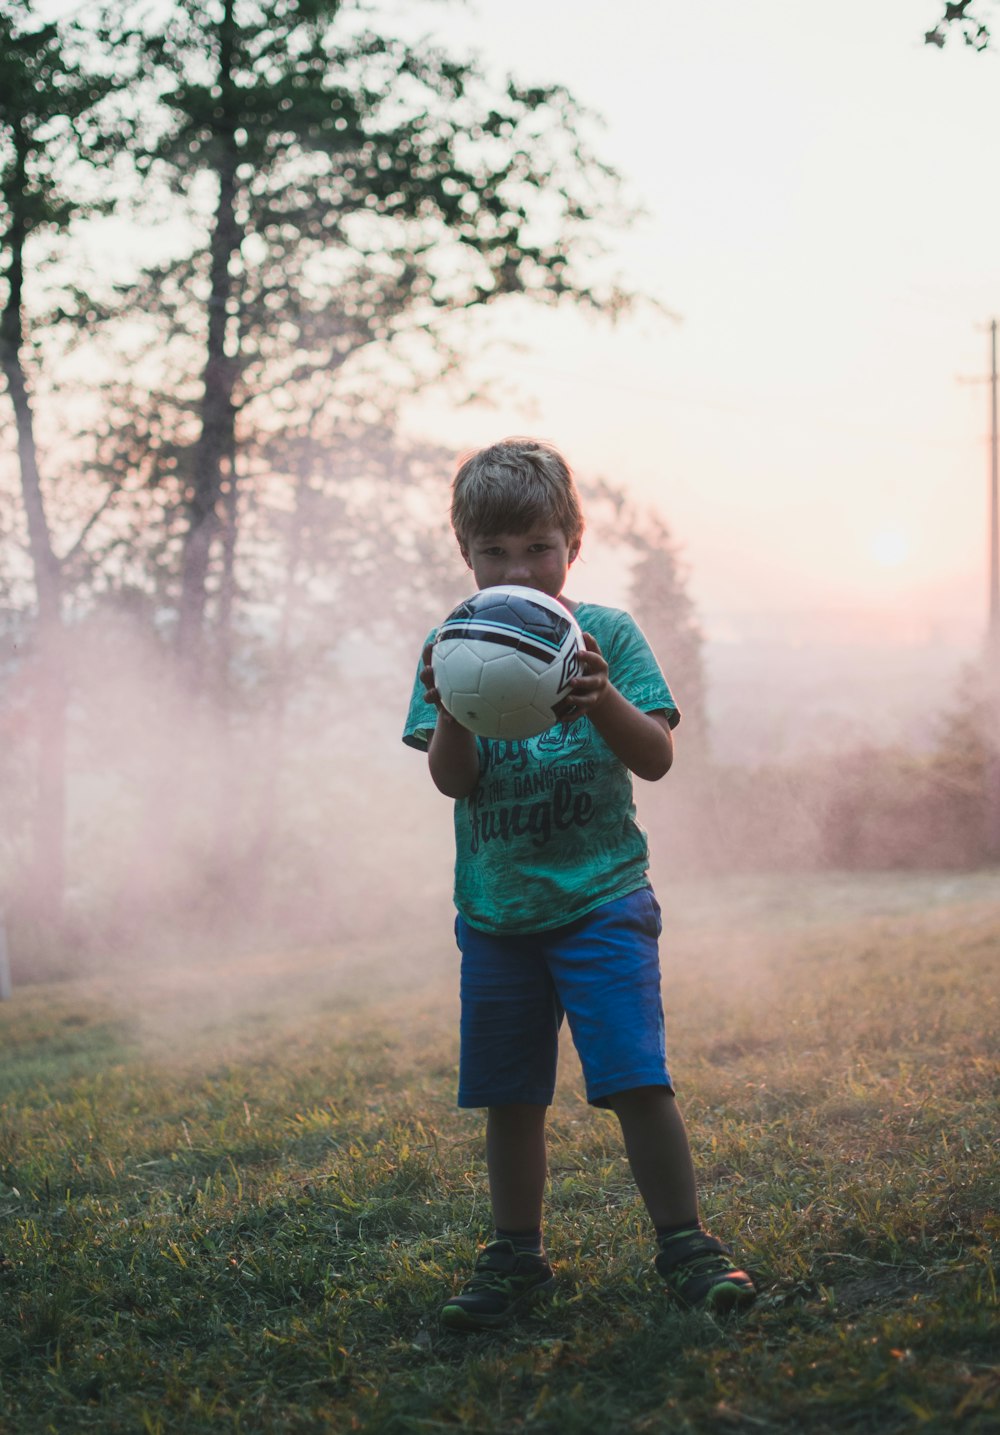 shallow focus photography of boy holding a ball